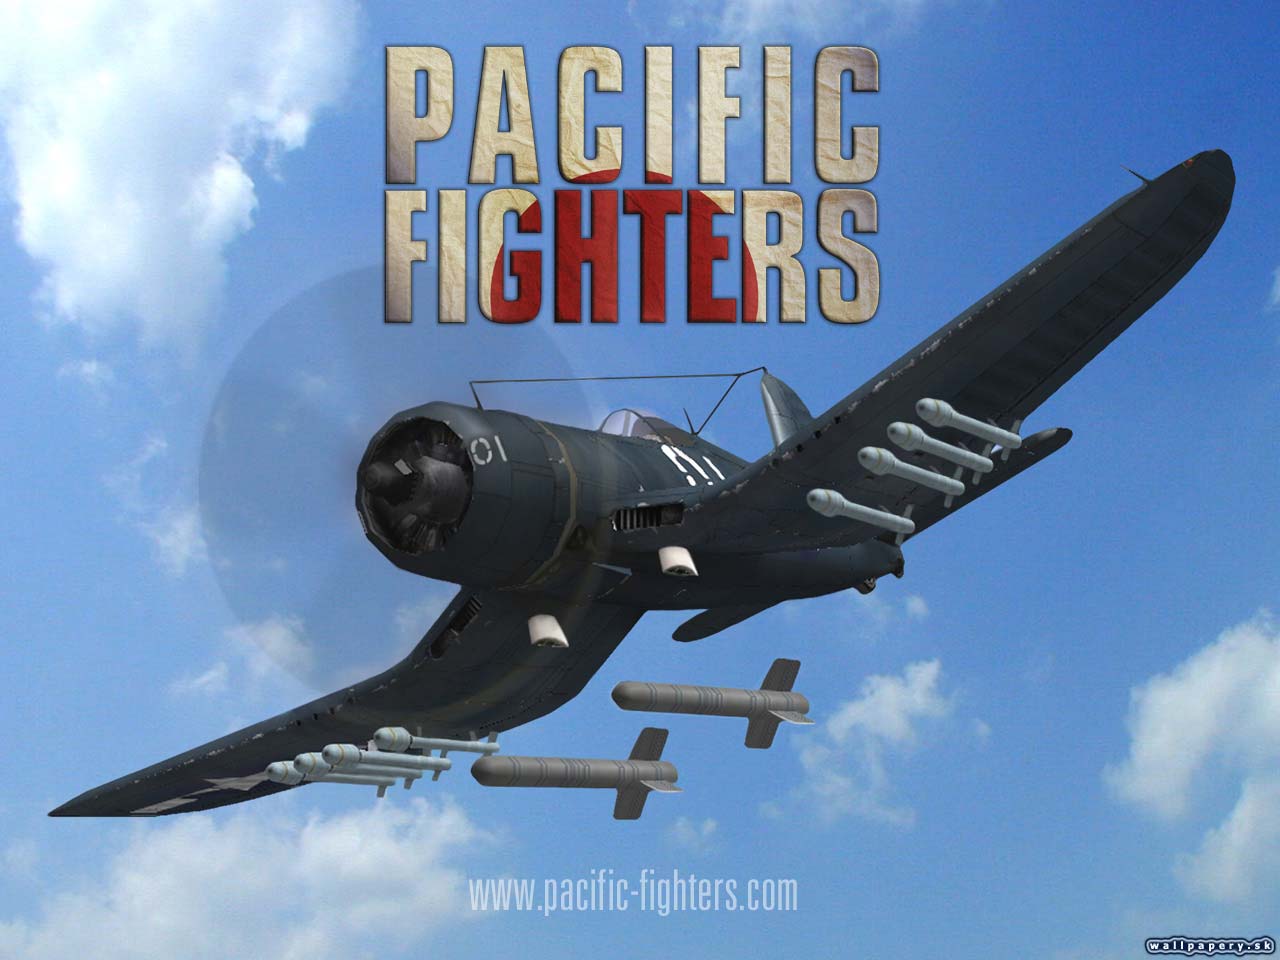 Pacific Fighters - wallpaper 2